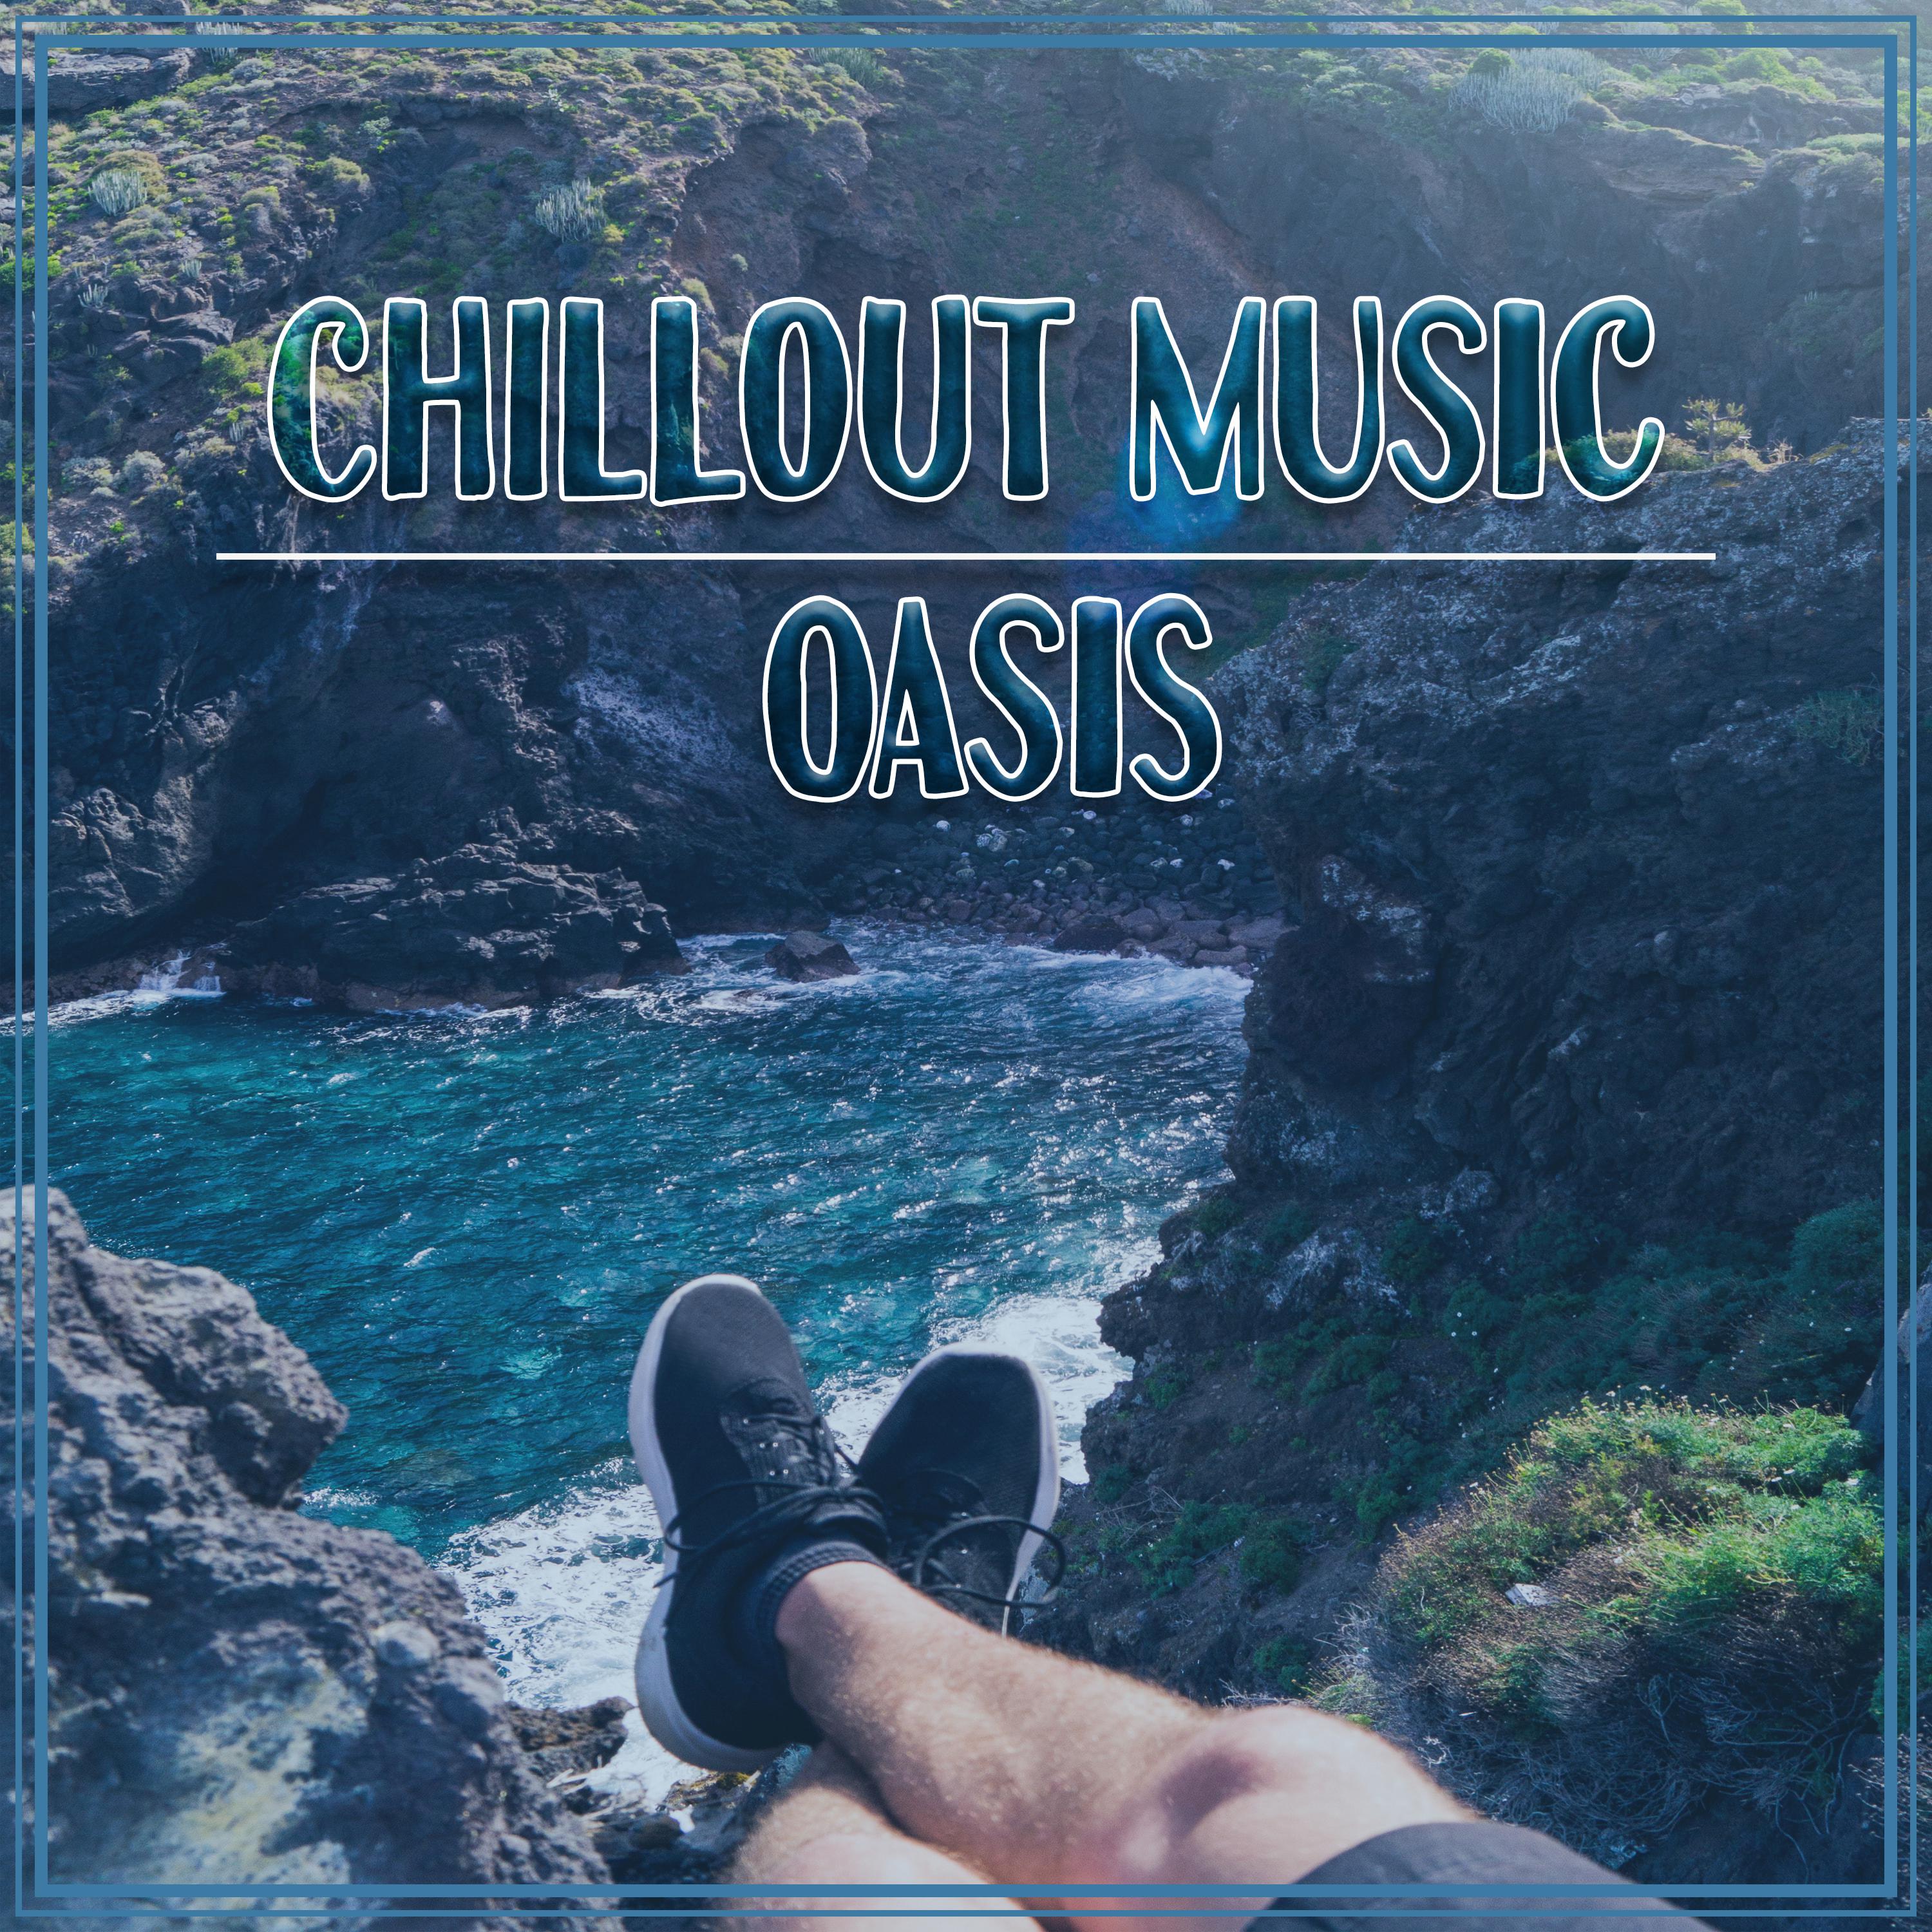 Chillout Music Oasis  Chill Out Hits Music, Most Relaxing Sounds